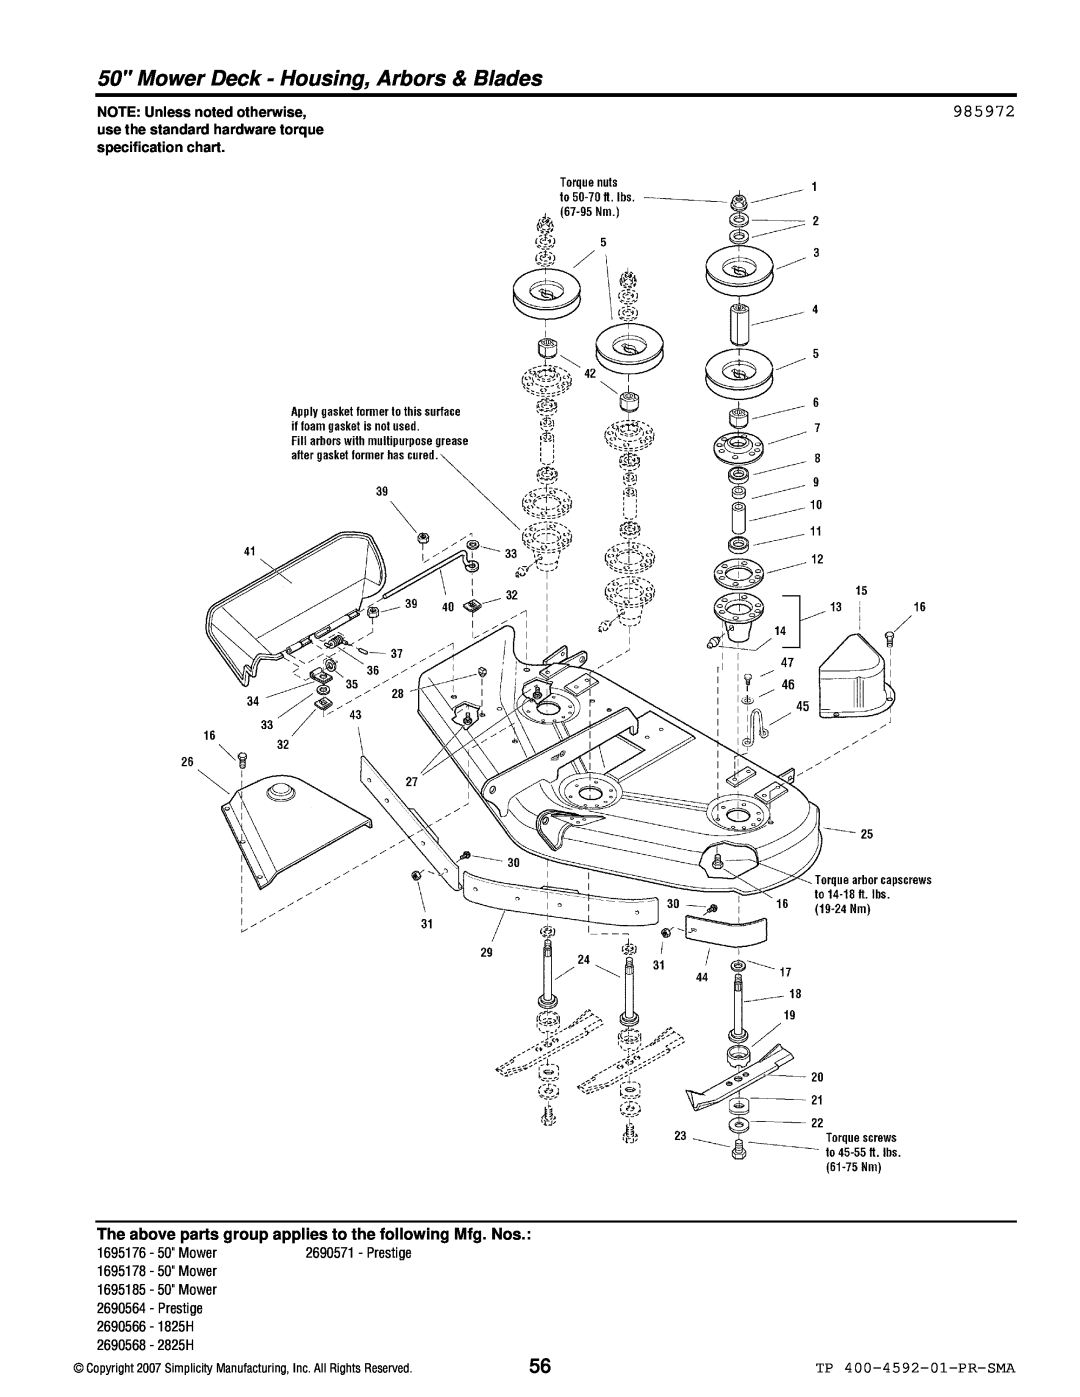 Simplicity 1800 Series Mower Deck - Housing, Arbors & Blades, 985972, TP 400-4592-01-PR-SMA, NOTE: Unless noted otherwise 